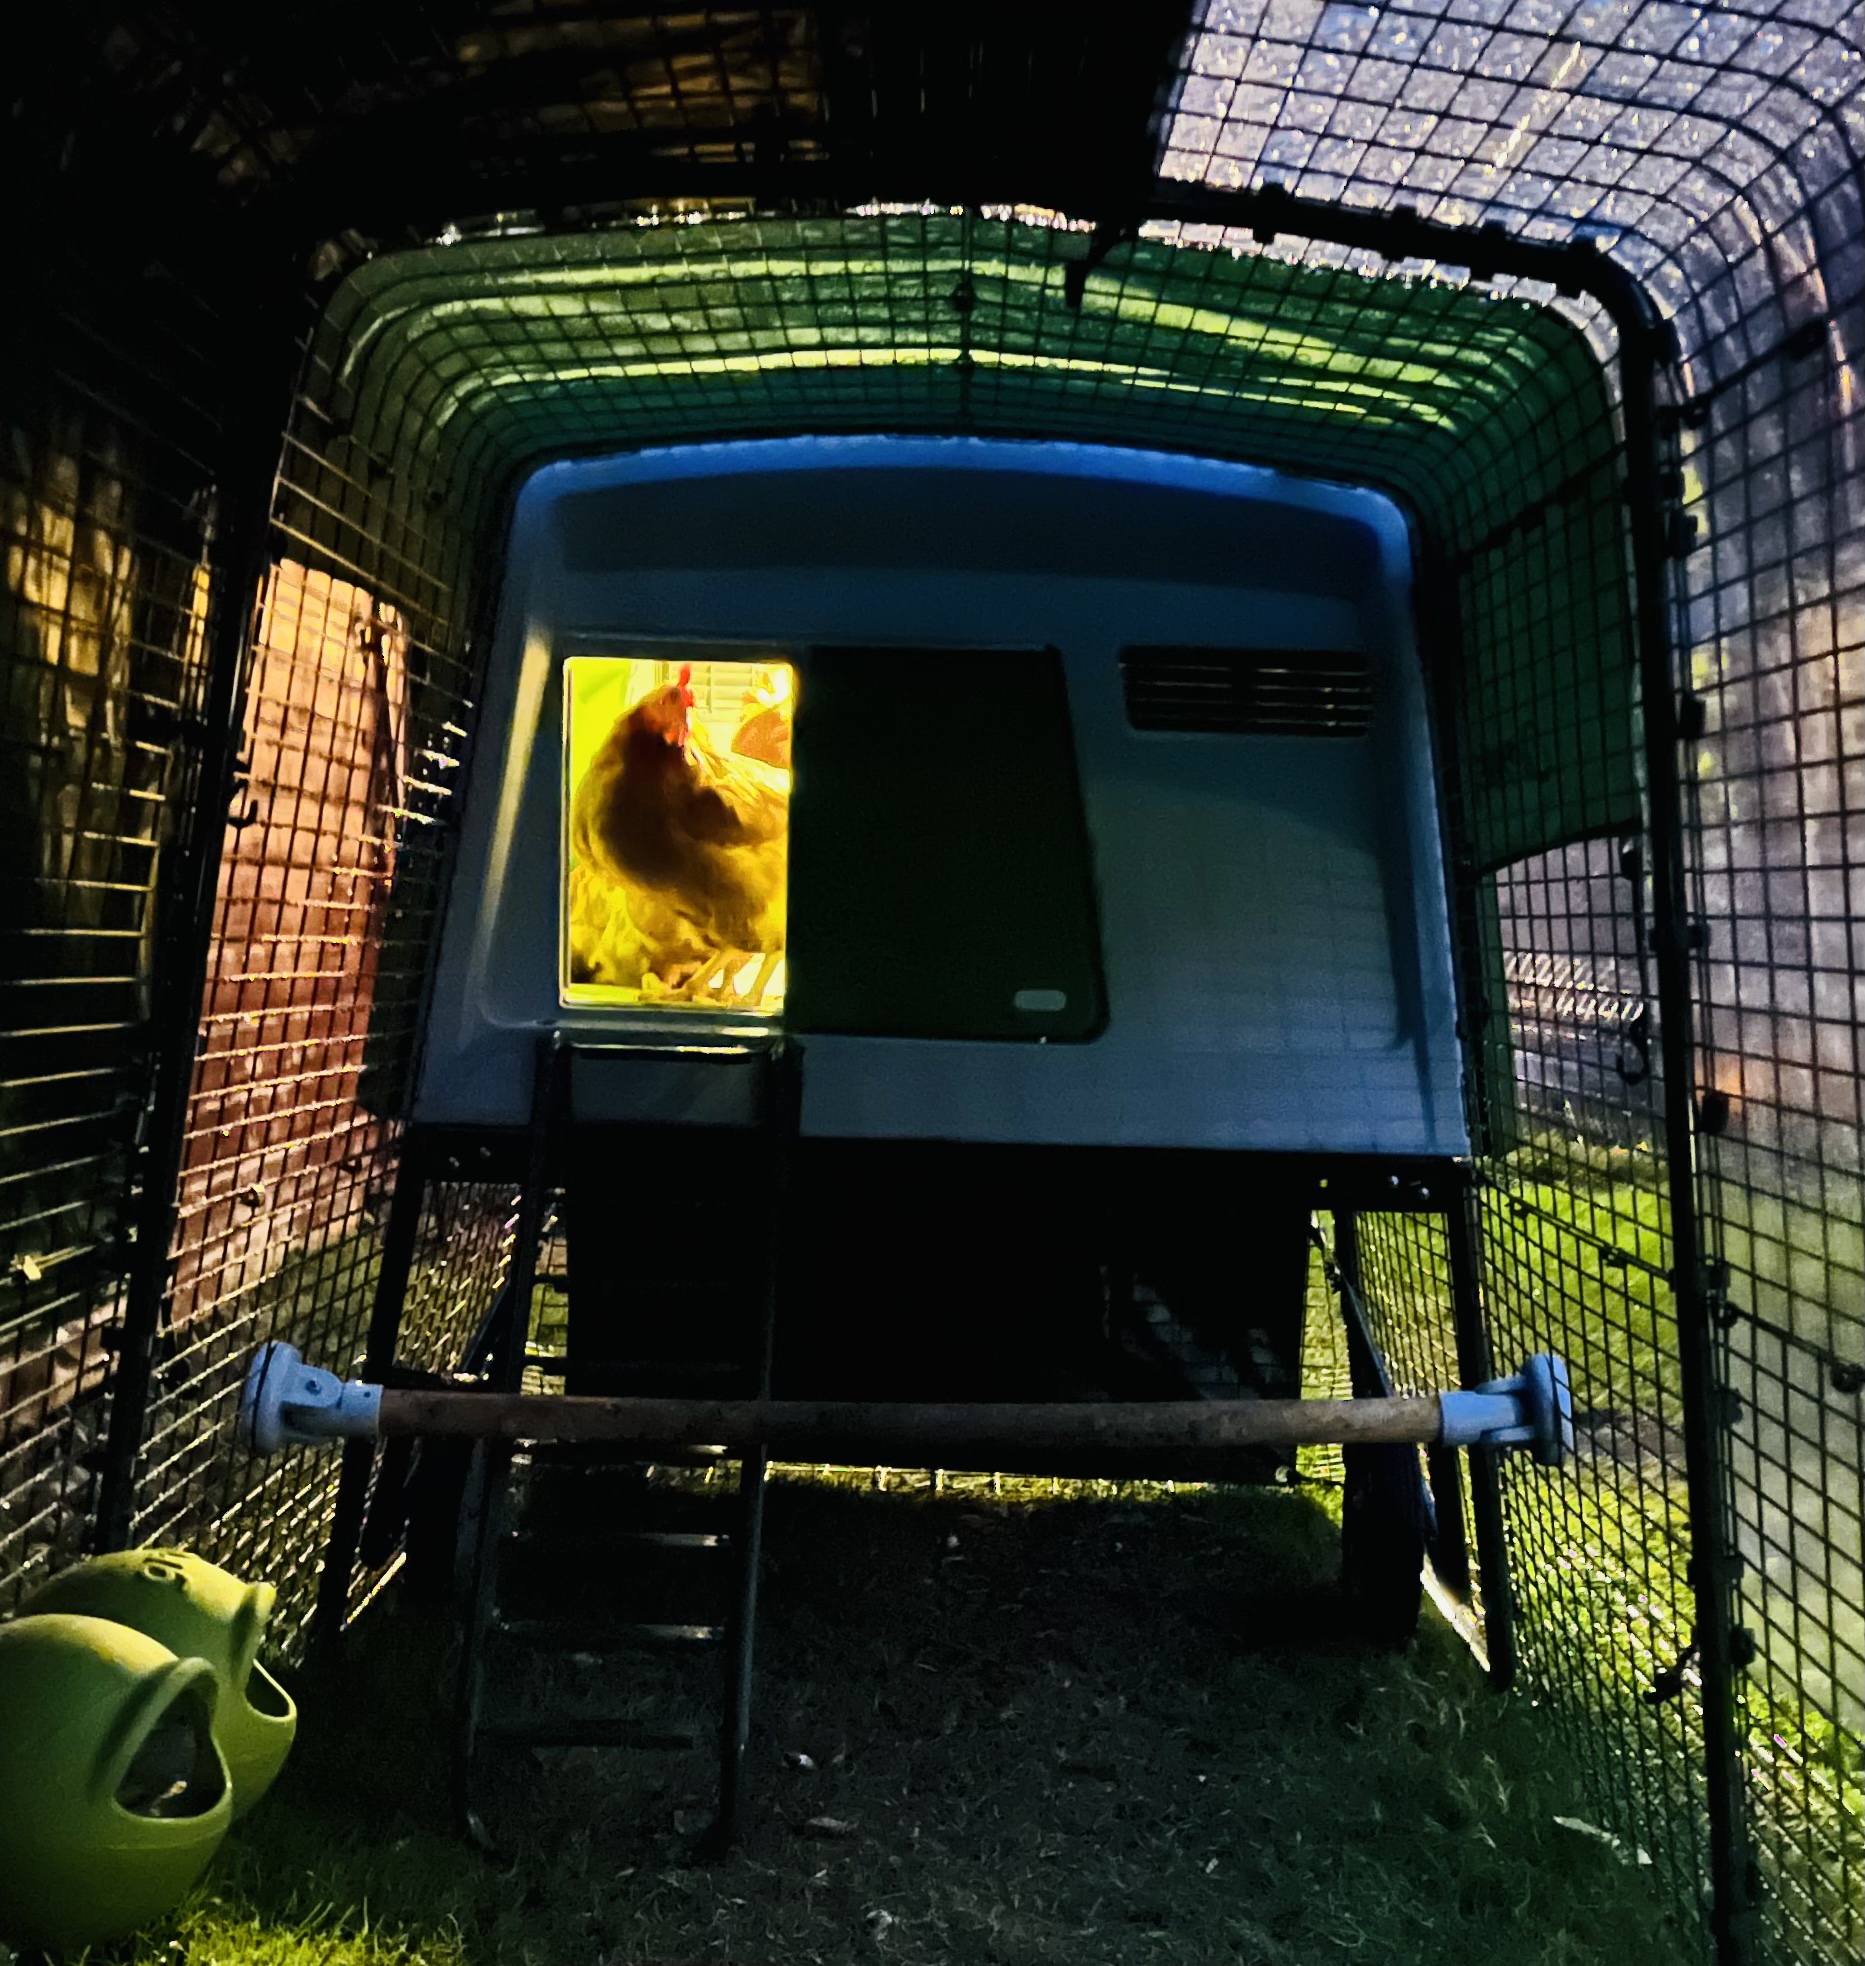 A chicken coop with the coop light on, with a chicken visible inside